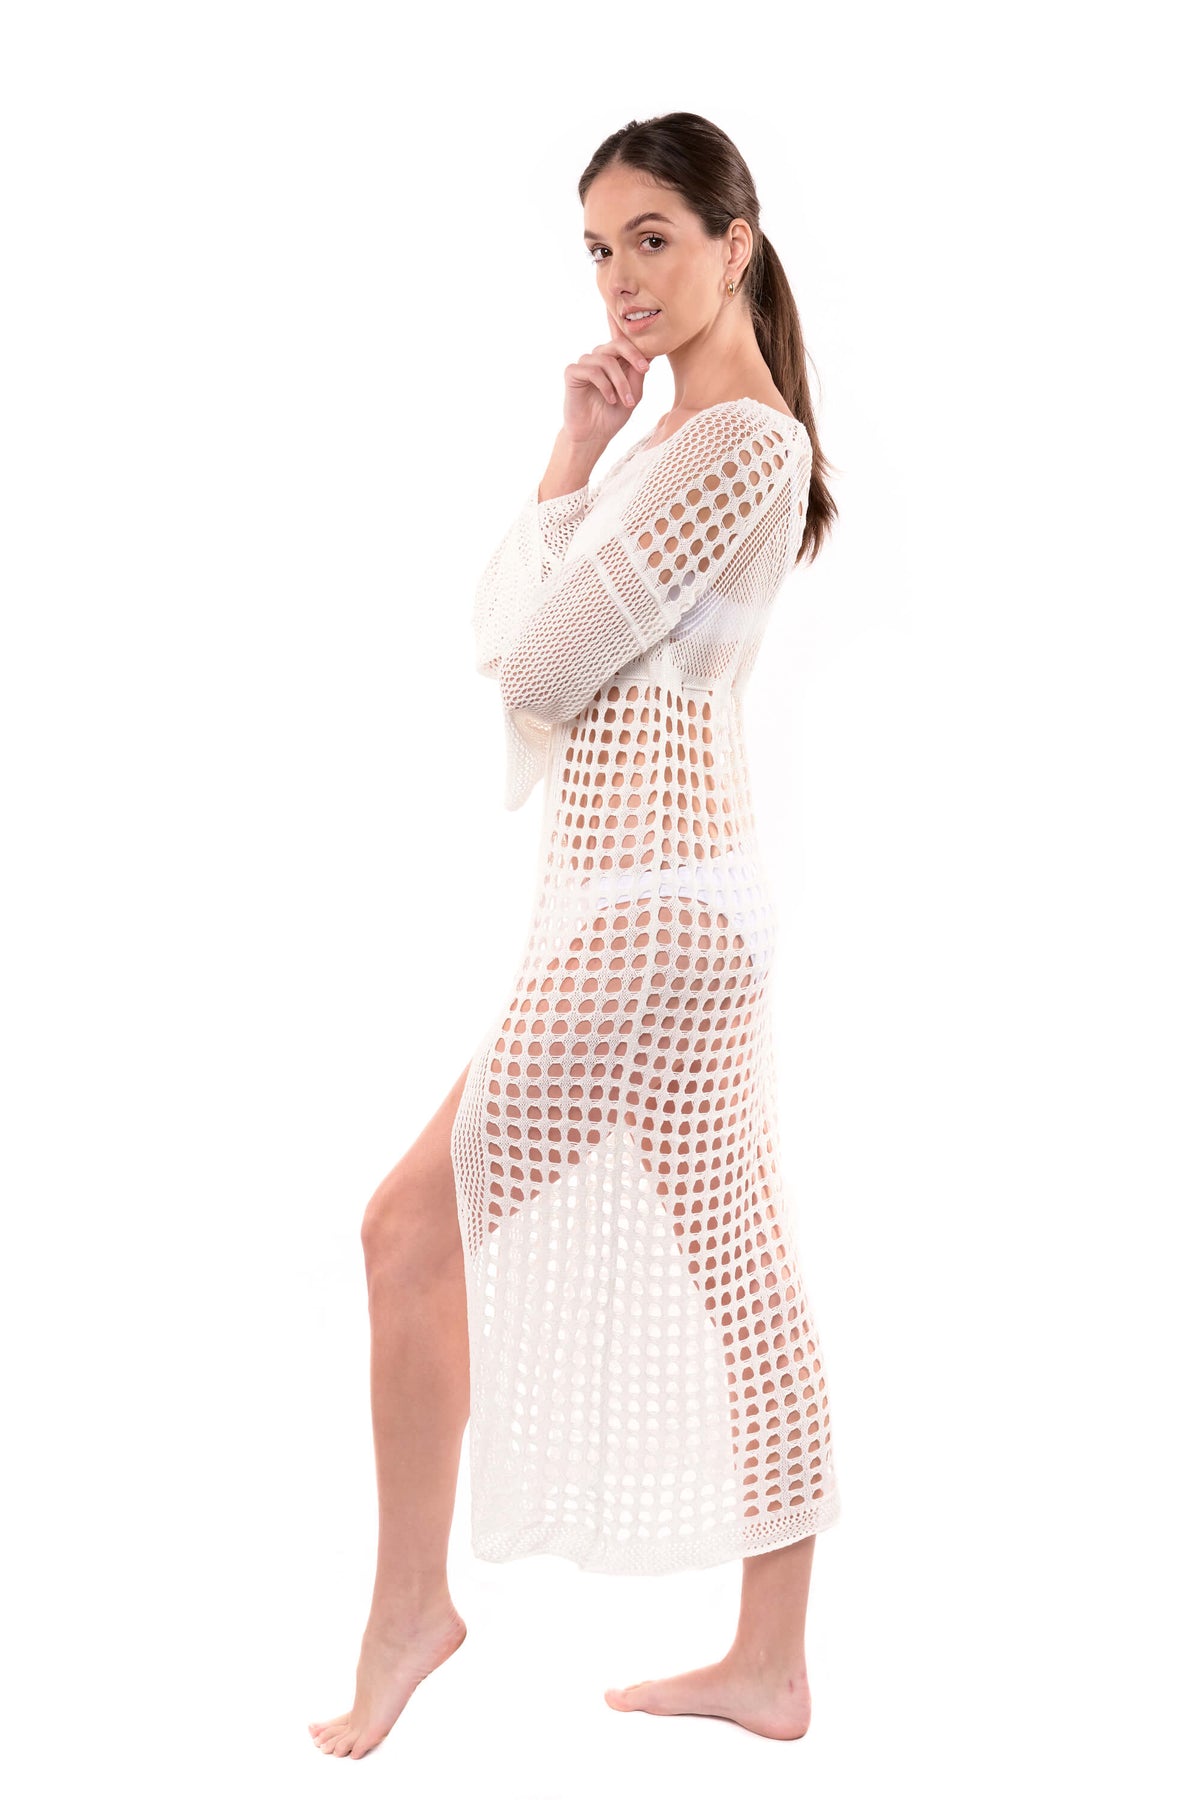 Studio photo with model showing the side of the Stella crochet white cover up